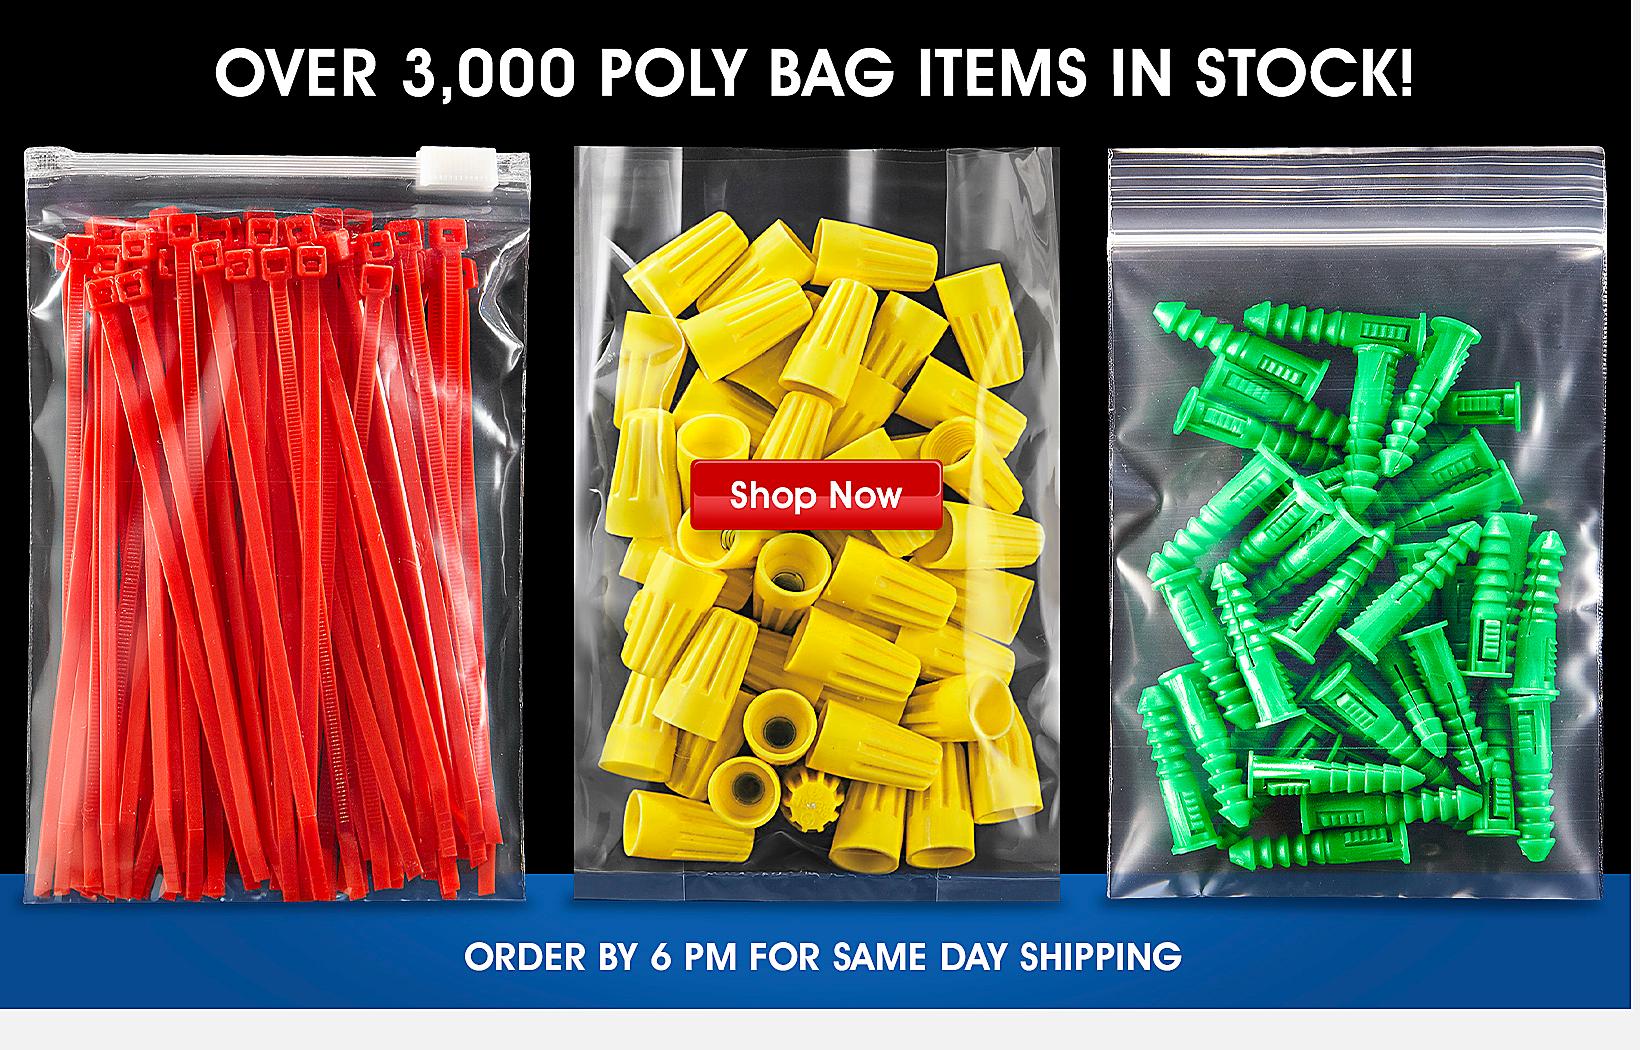 Over 3,000 poly bag items in stock!. Shop Now. ORDER BY 6 PM FOR SAME DAY SHIPPING